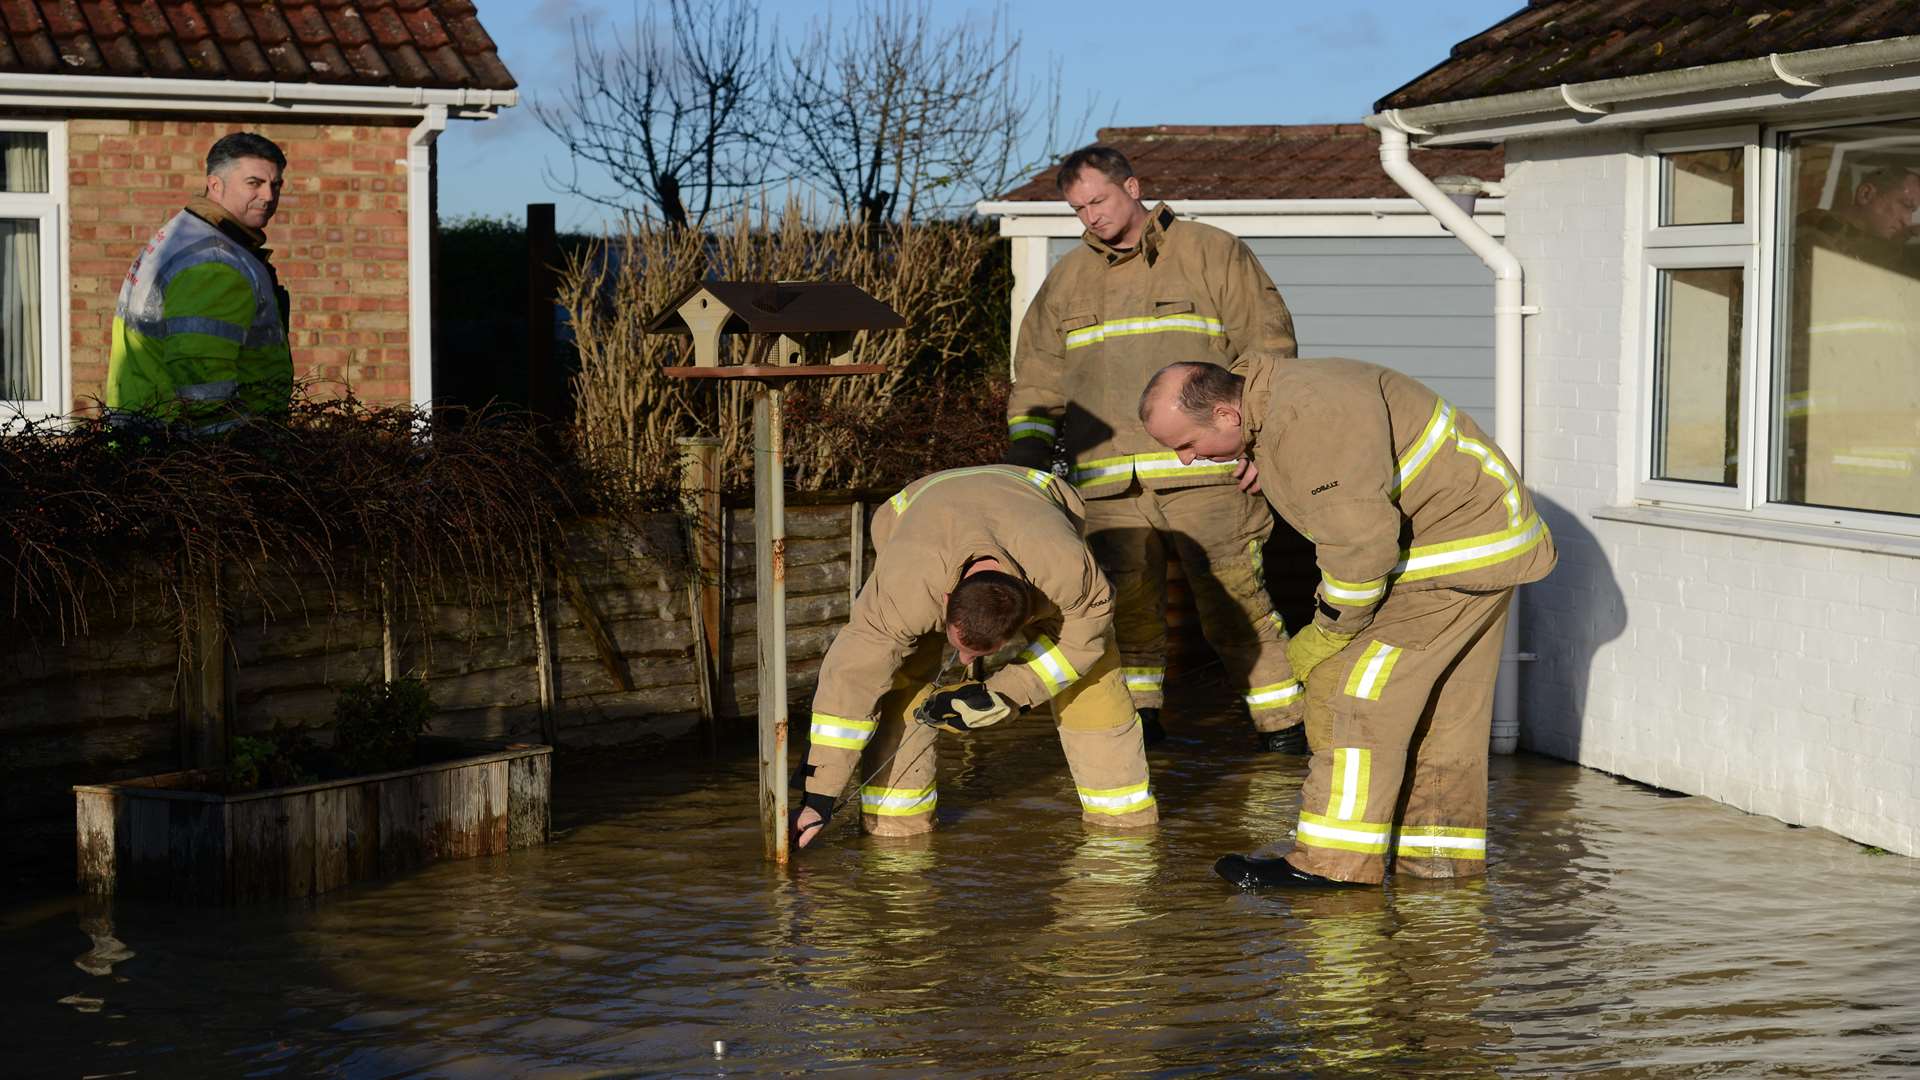 Firefighters tackle to pump some of the water from the front garden